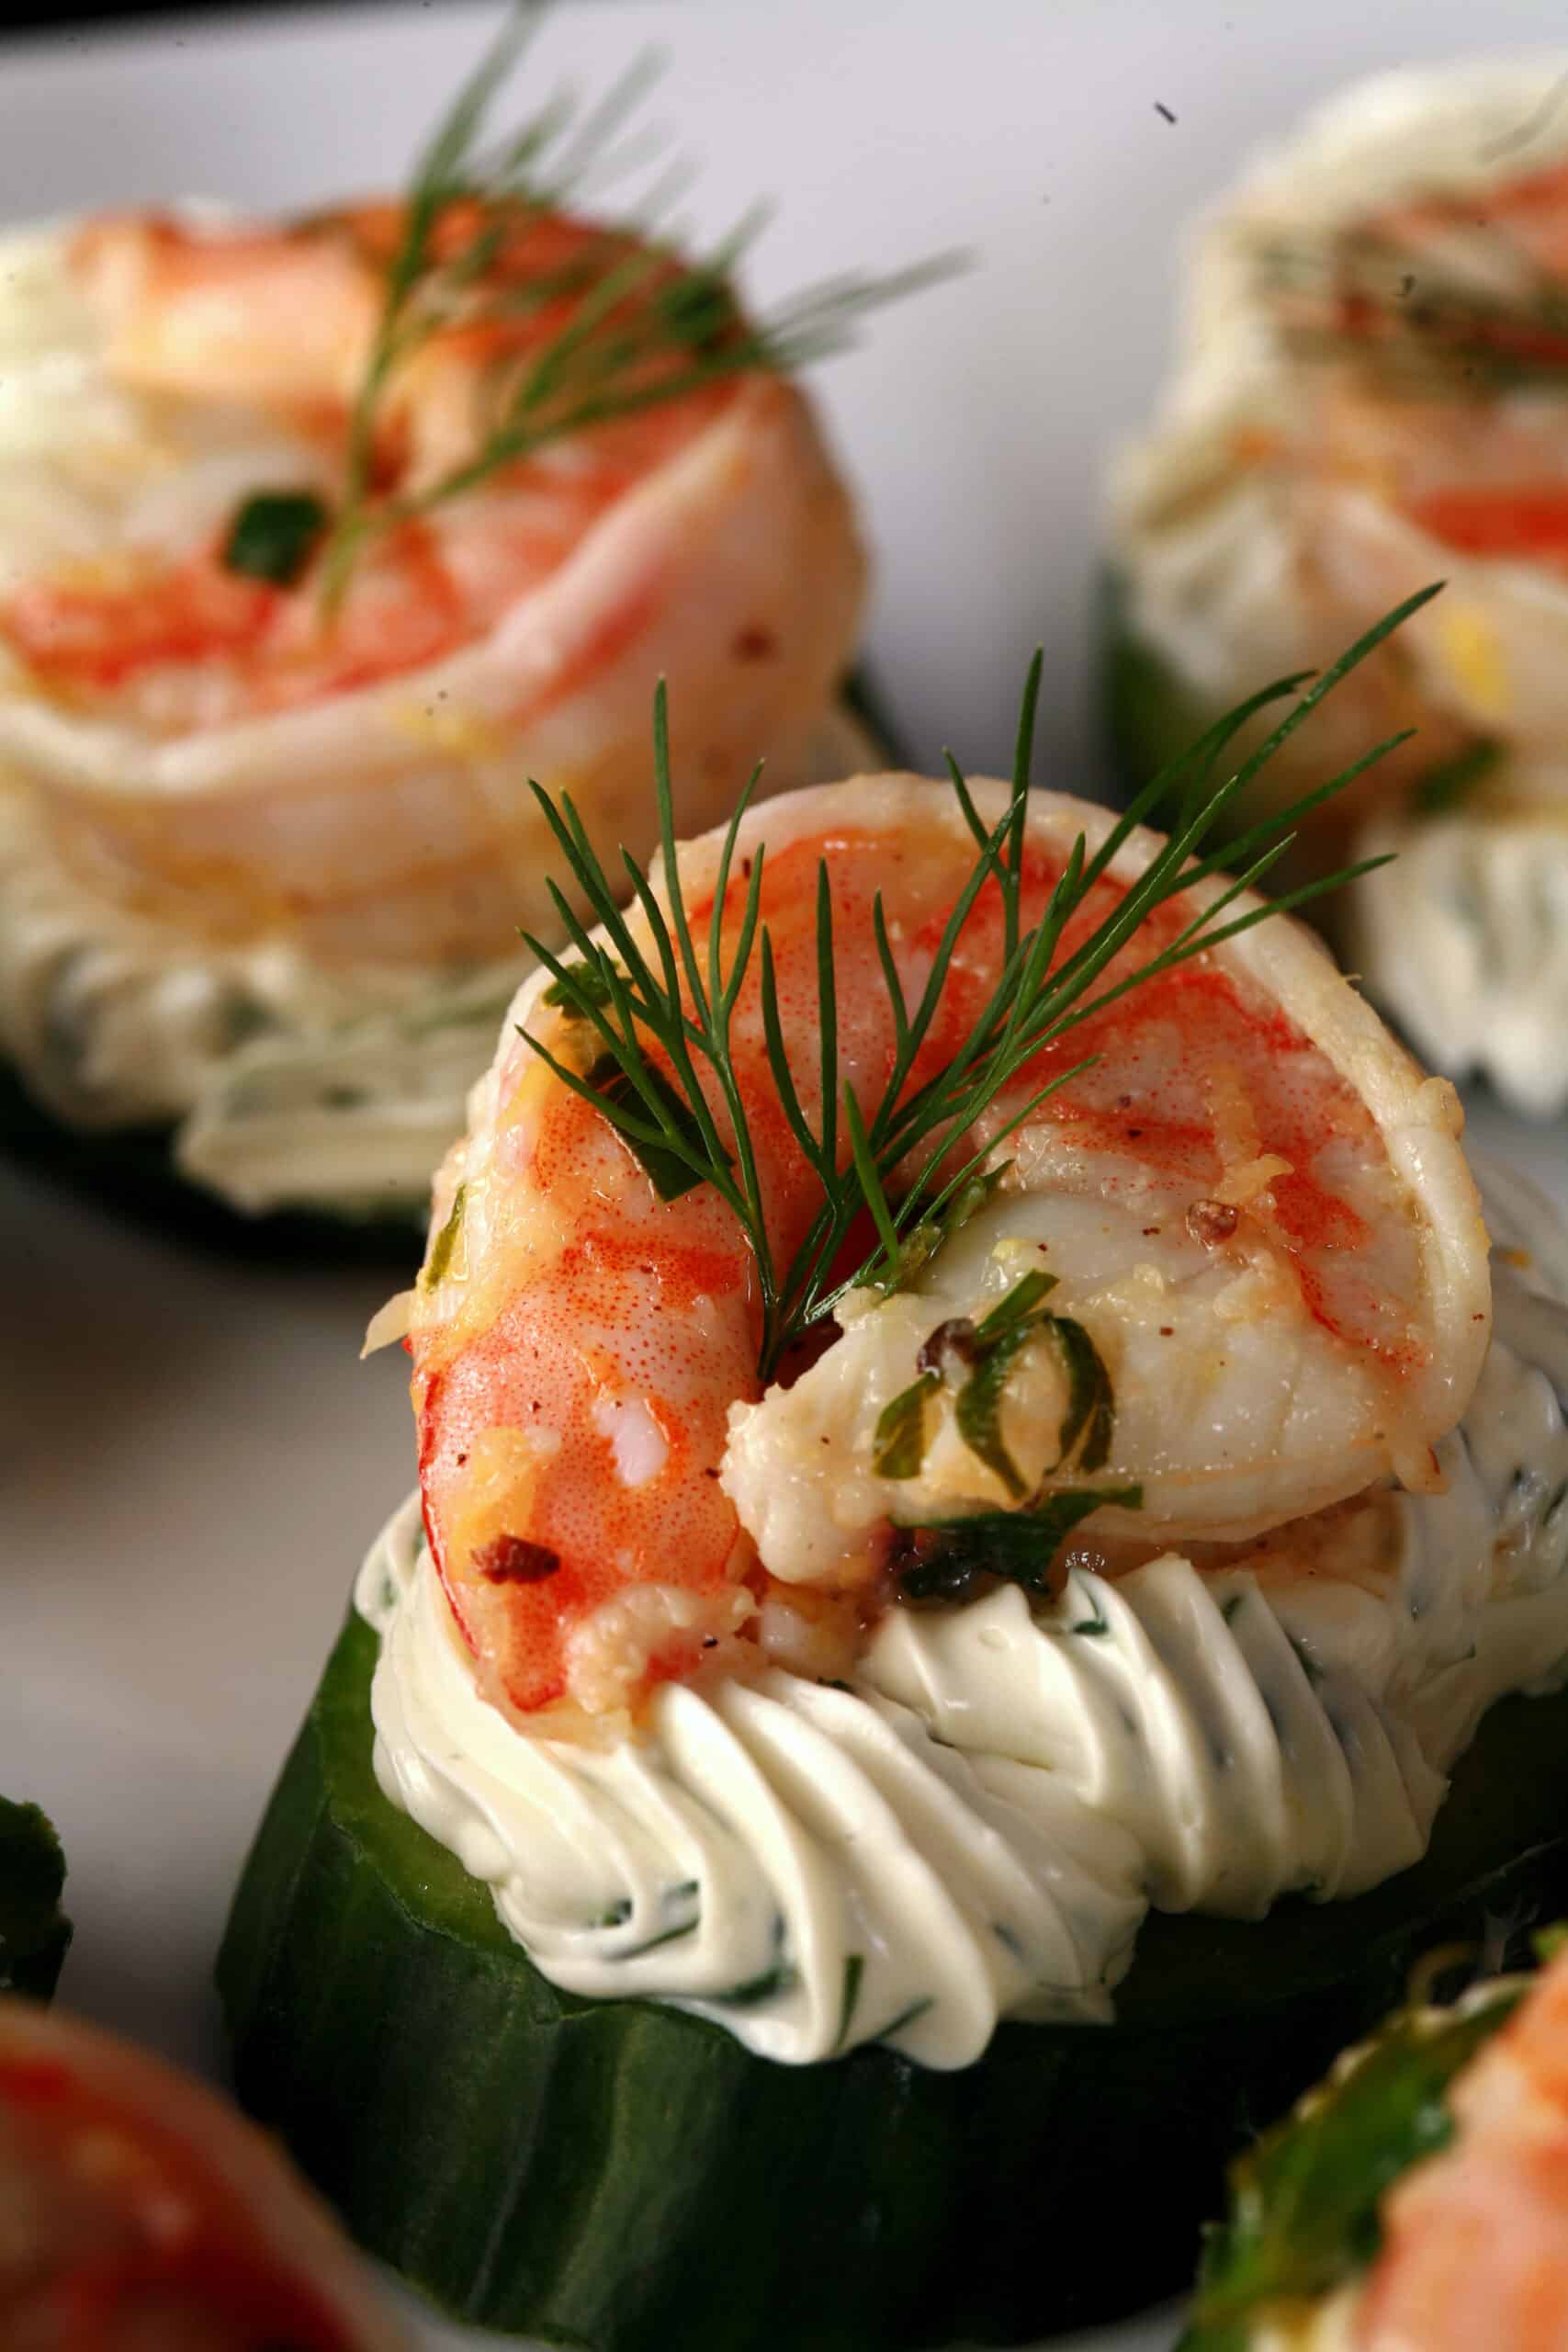 A plate of shrimp canapes, using cream cheese and cucumber slices.